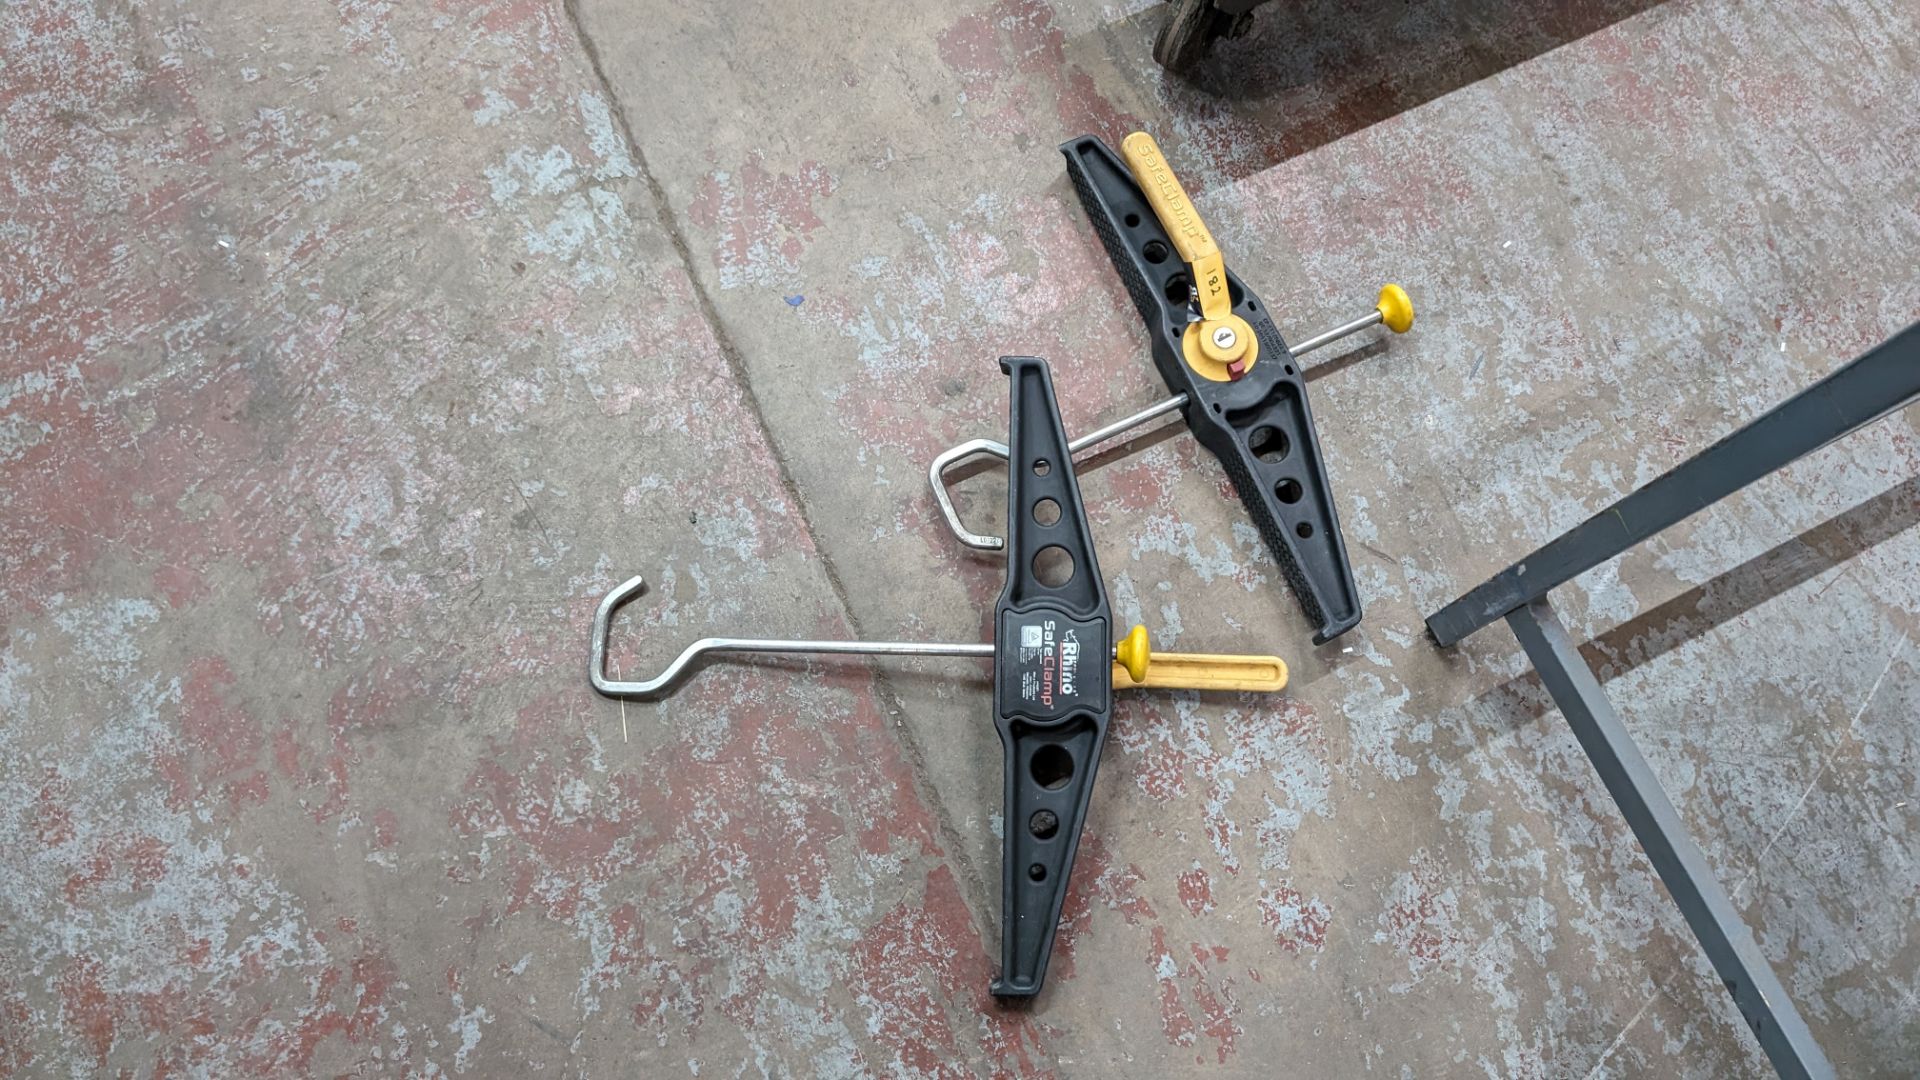 Pair of Rhino safe clamps for use with ladders - Image 5 of 5